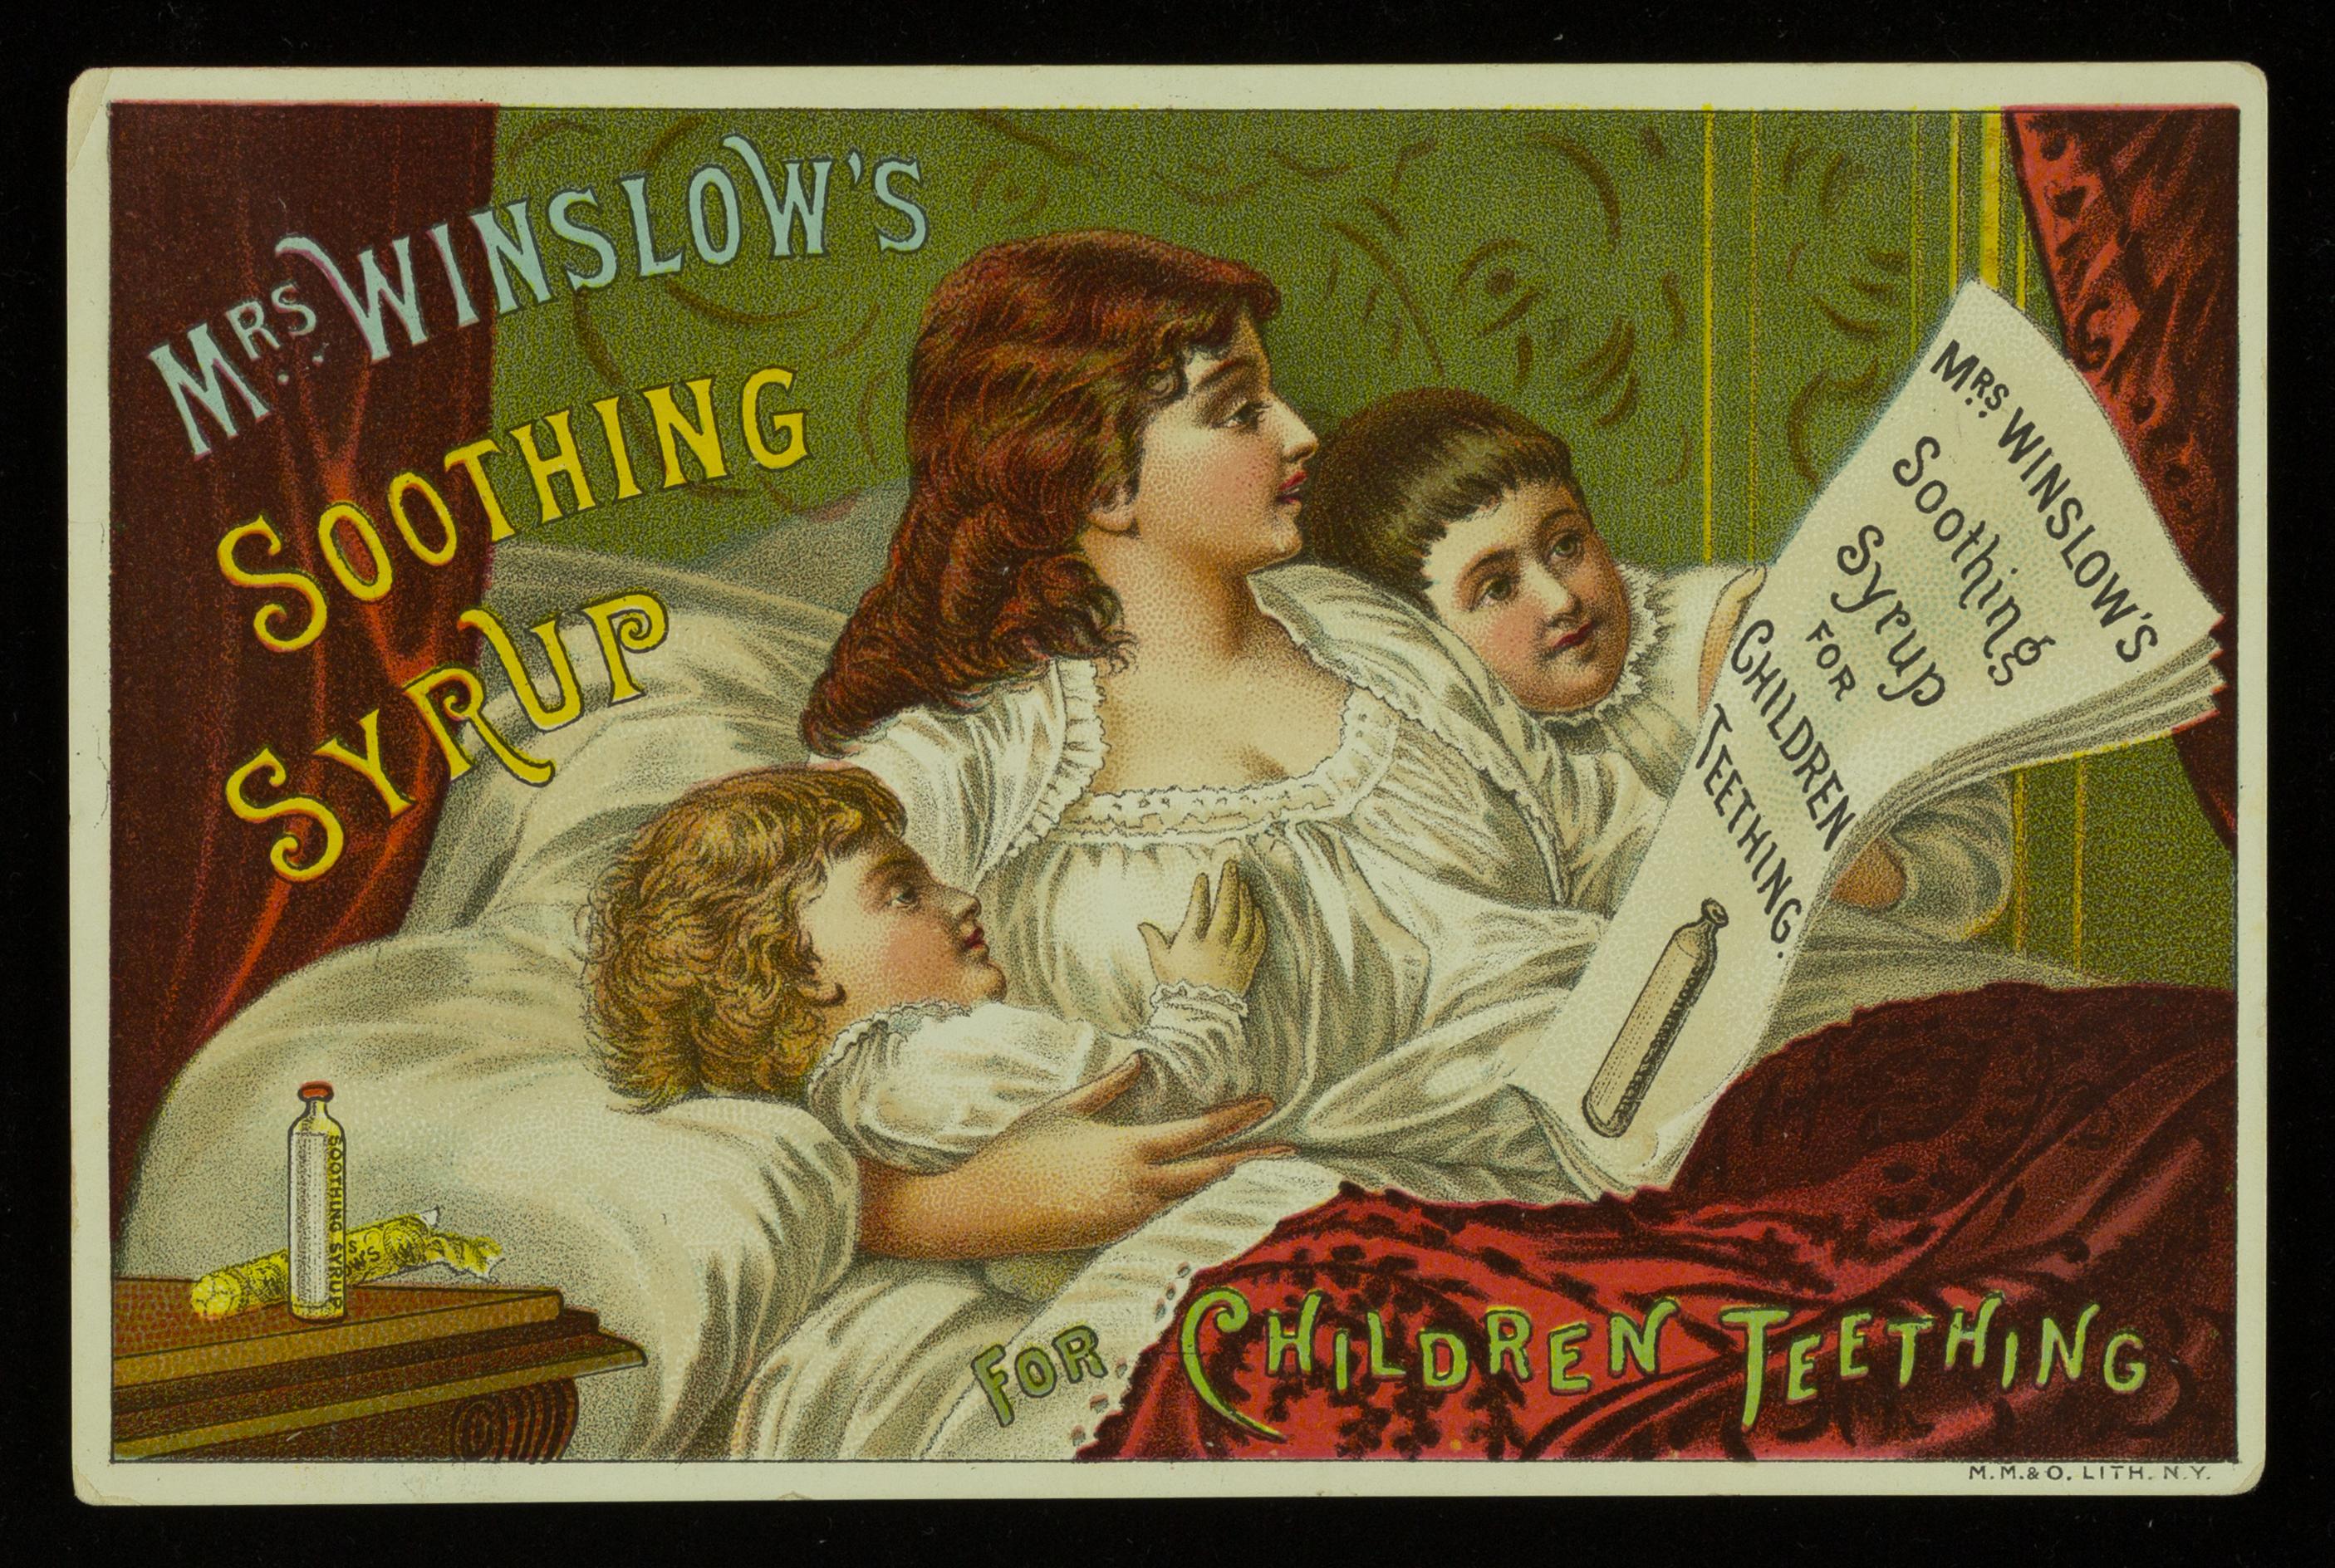 Mrs. Winslow's Soothing Syrup